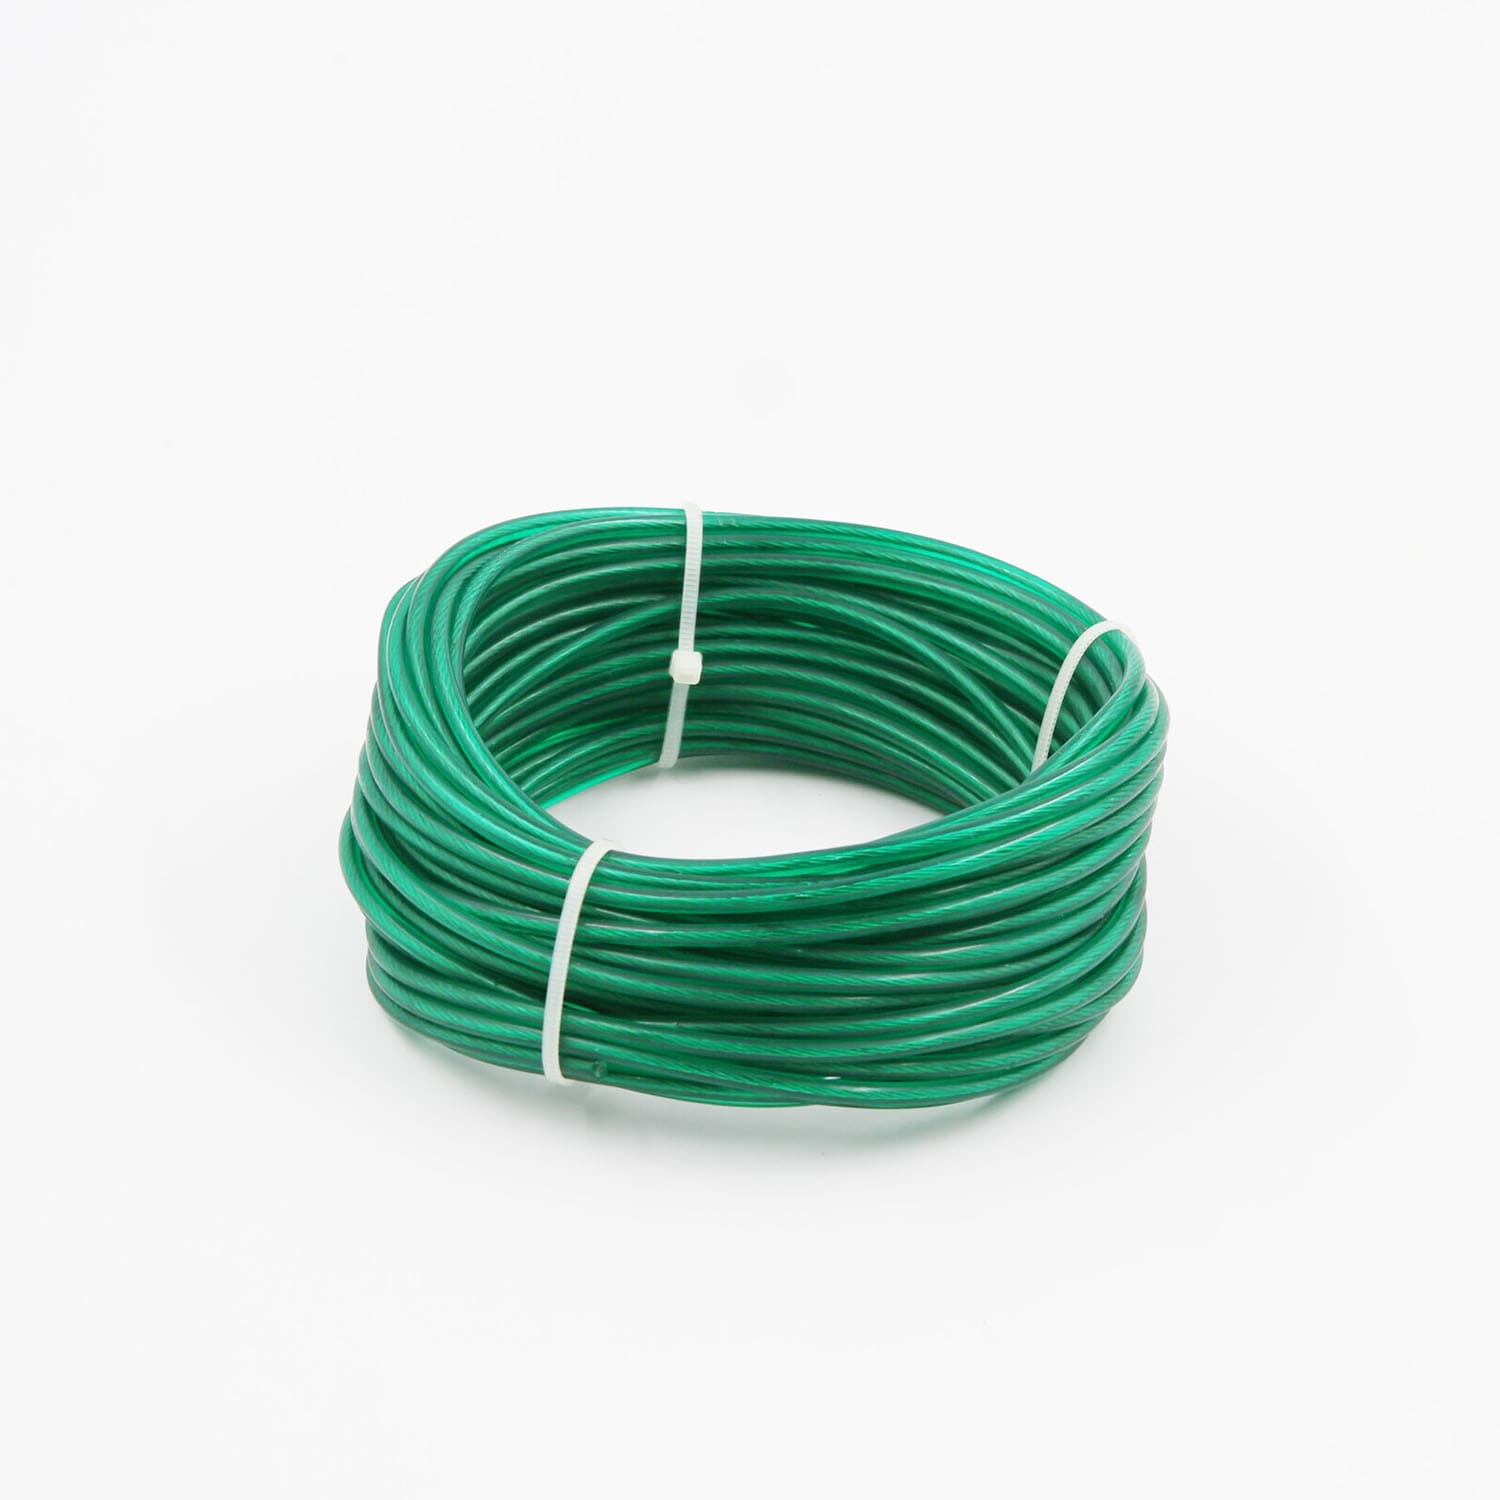 Thick Elastic Cords: Stretchy Cords By The Spool (Roll) / 300 ft - 1/8 (D)  